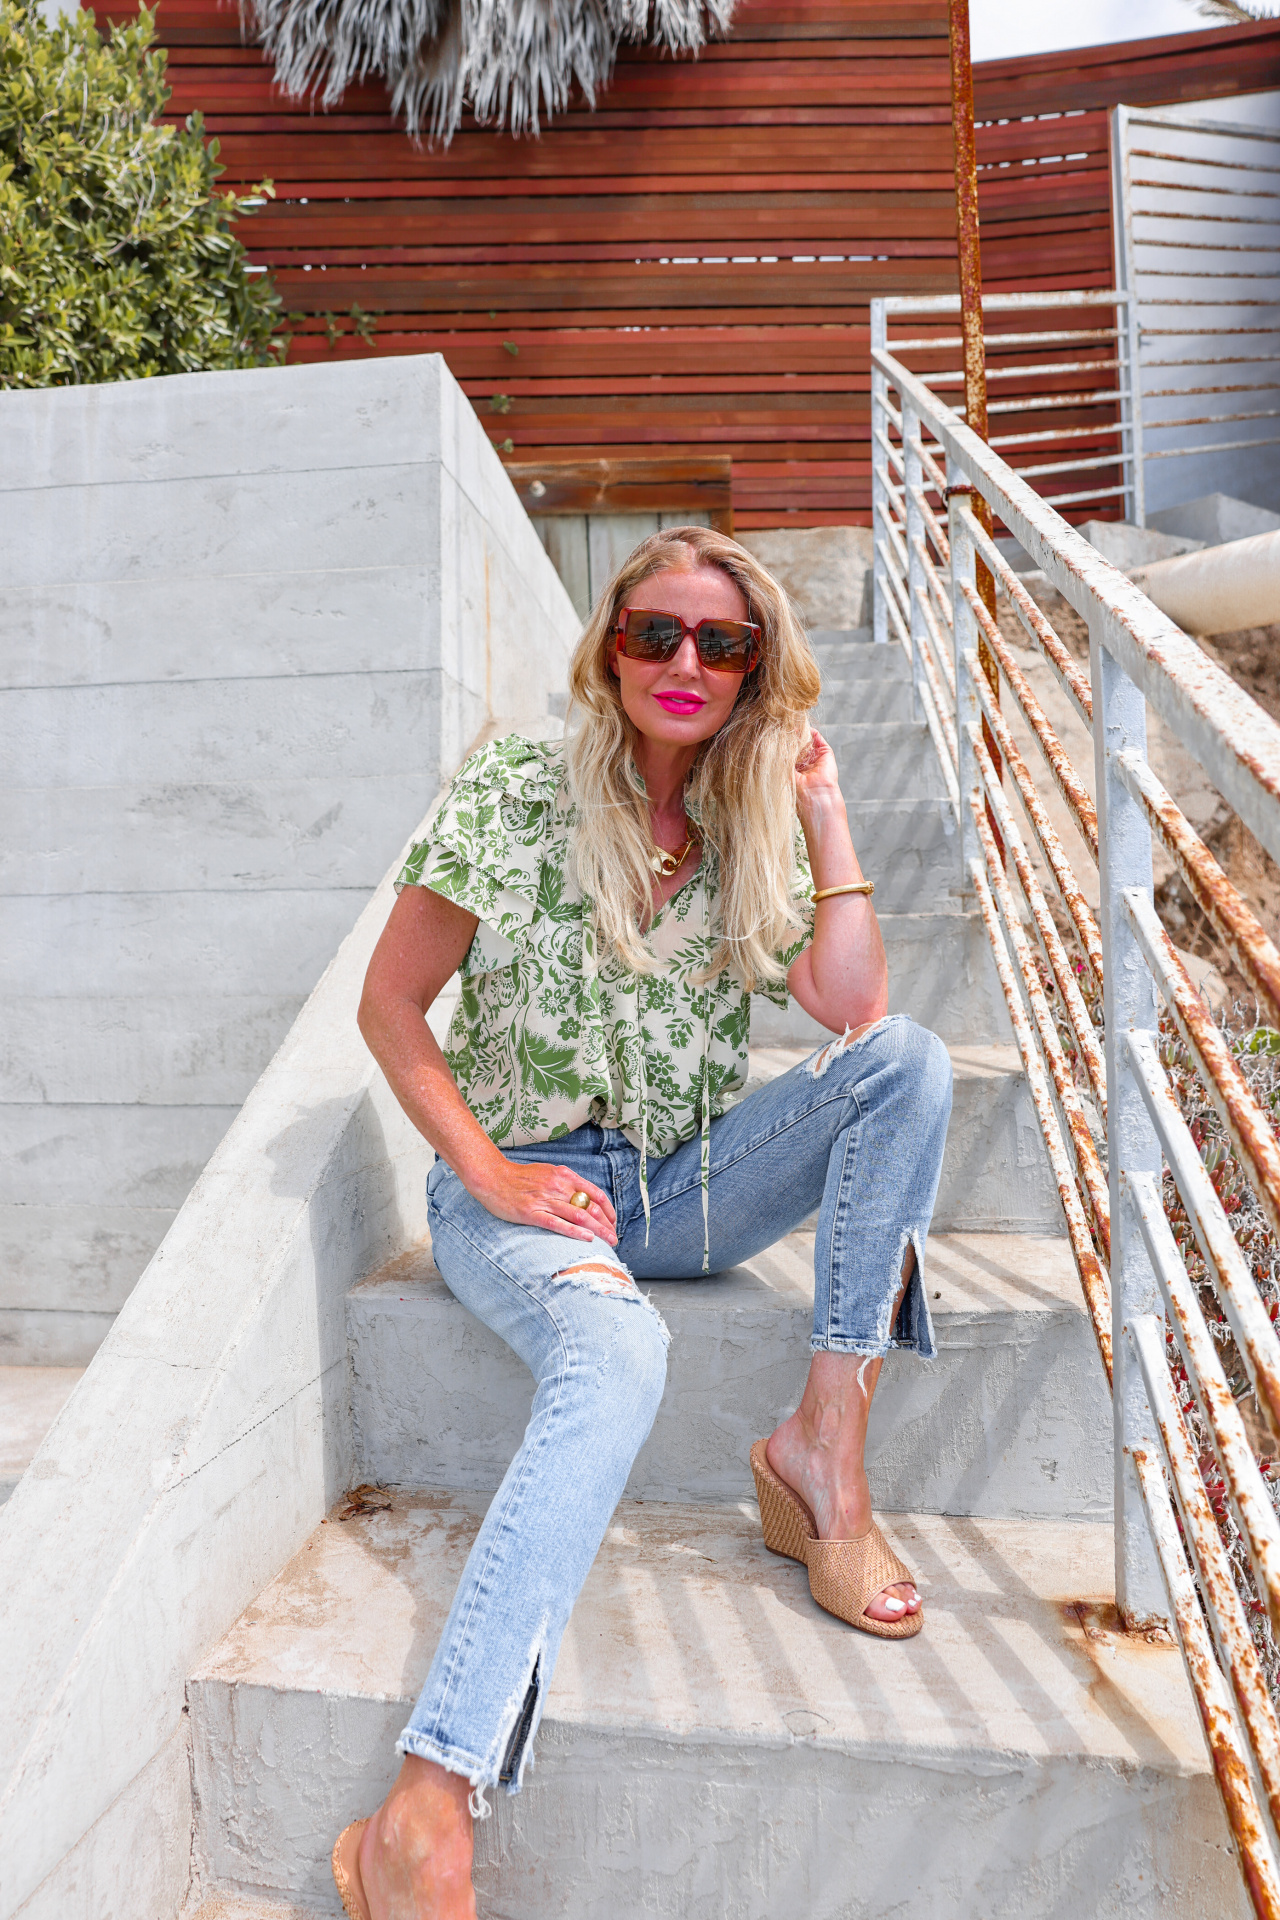 summer mom style, best summer mom outfits, summer mom outfits 2022, casual mom outfits summer, stylish mom outfits 2022, fashion for moms in their 30s, fashion for moms in their 40s, cute mom outfits, casual mom outfits, erin busbee, busbee style, fashion over 40, malibu, california, hunter bell green printed mille top, moussy vintage ithan jeans, veronica beard woven wedges, saint laurent square sunglasses, paco rabbane chunky gold necklace